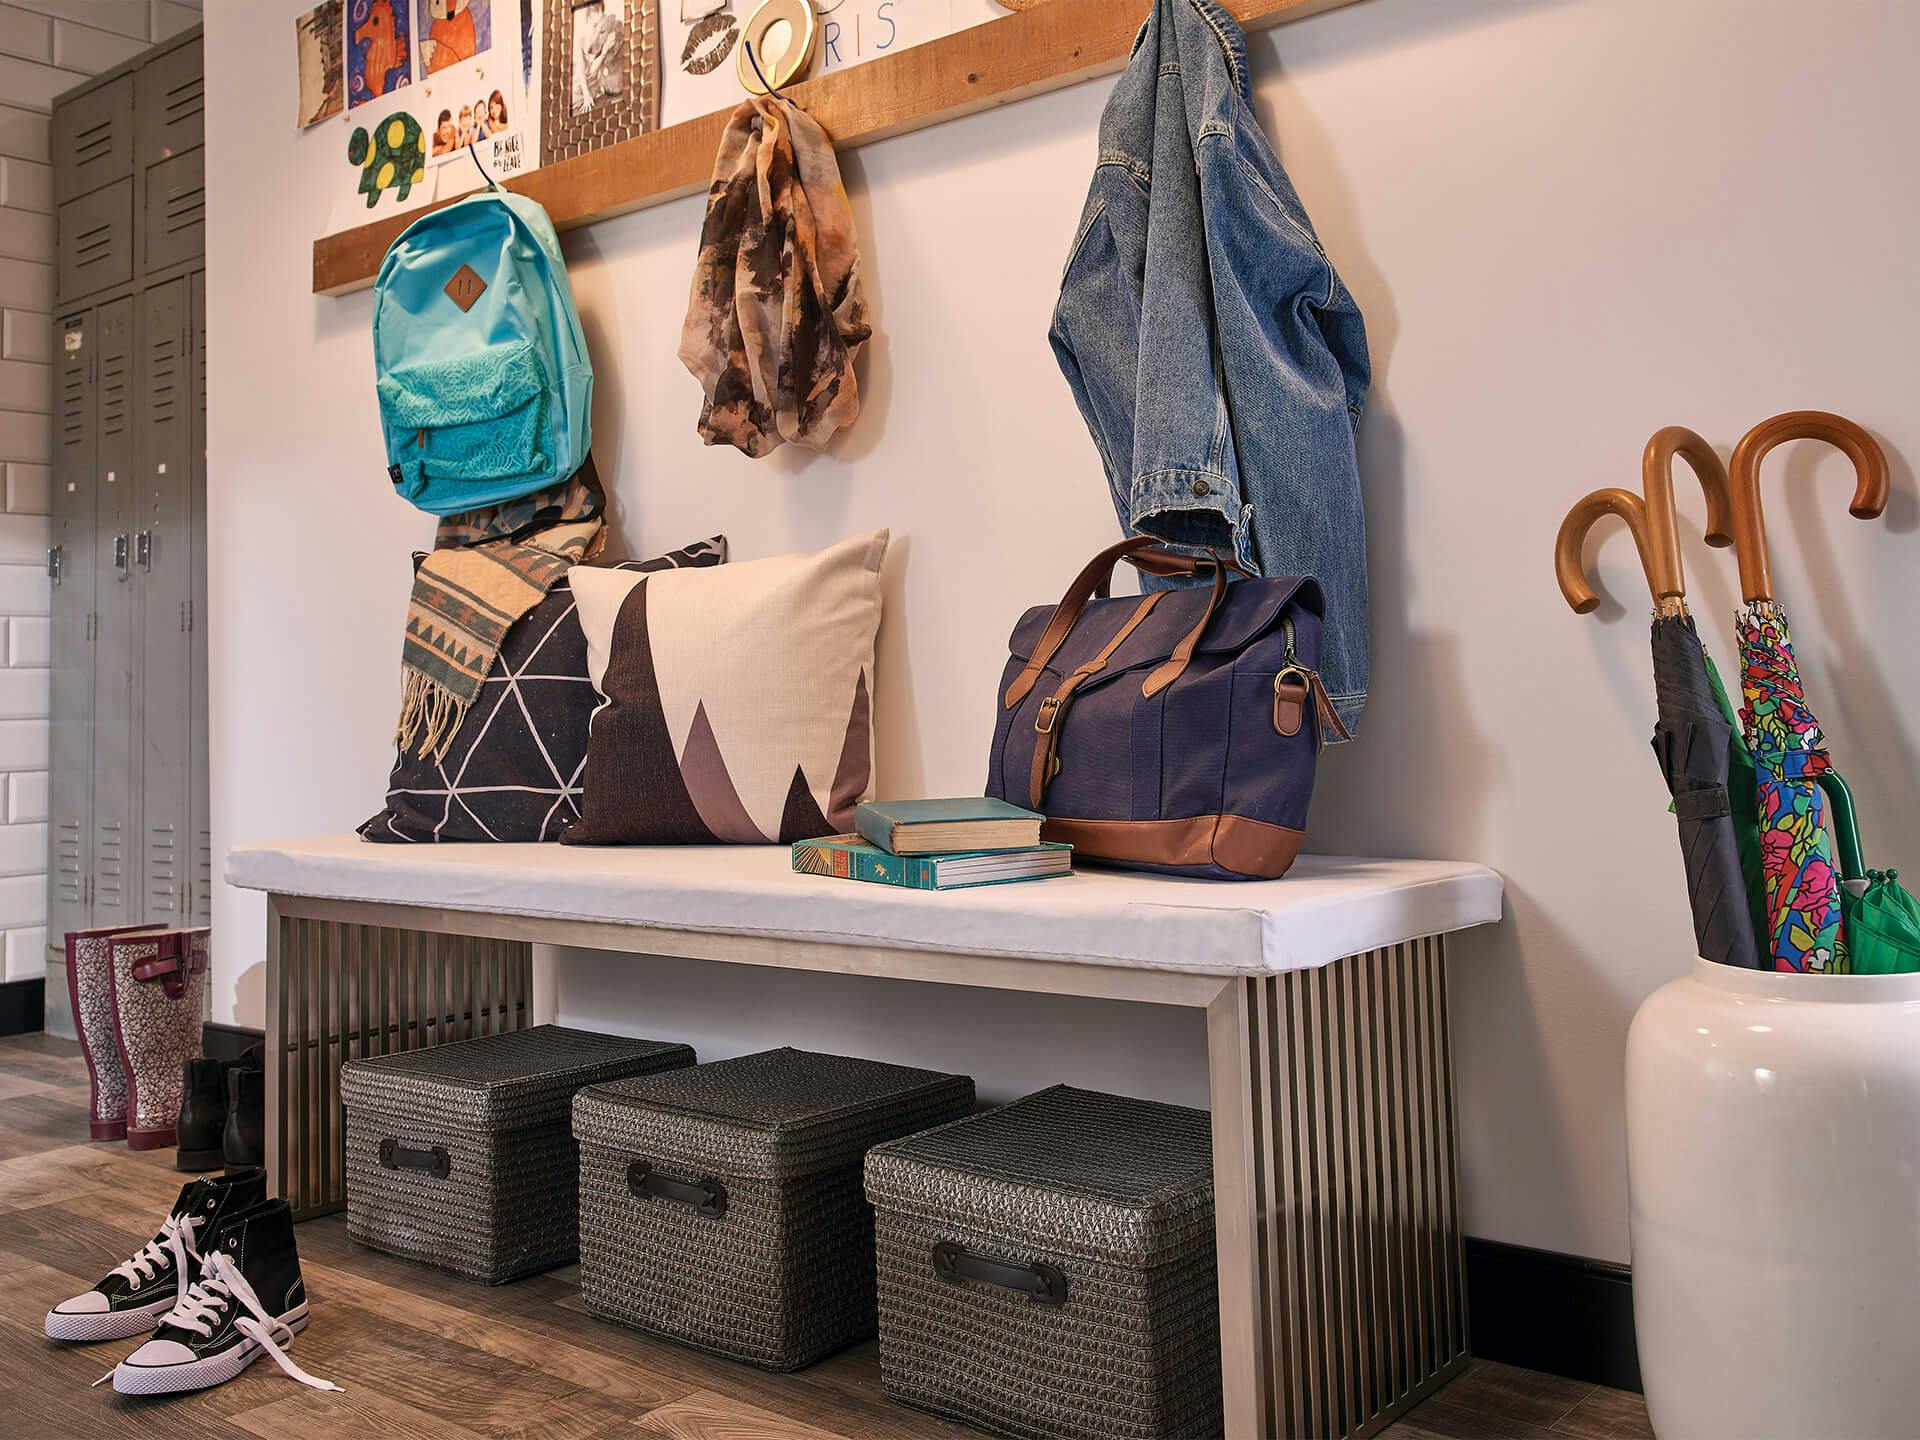 Bench in mudroom surrounded by household items such as shoes, backpacks, umbrellas, books, etc.